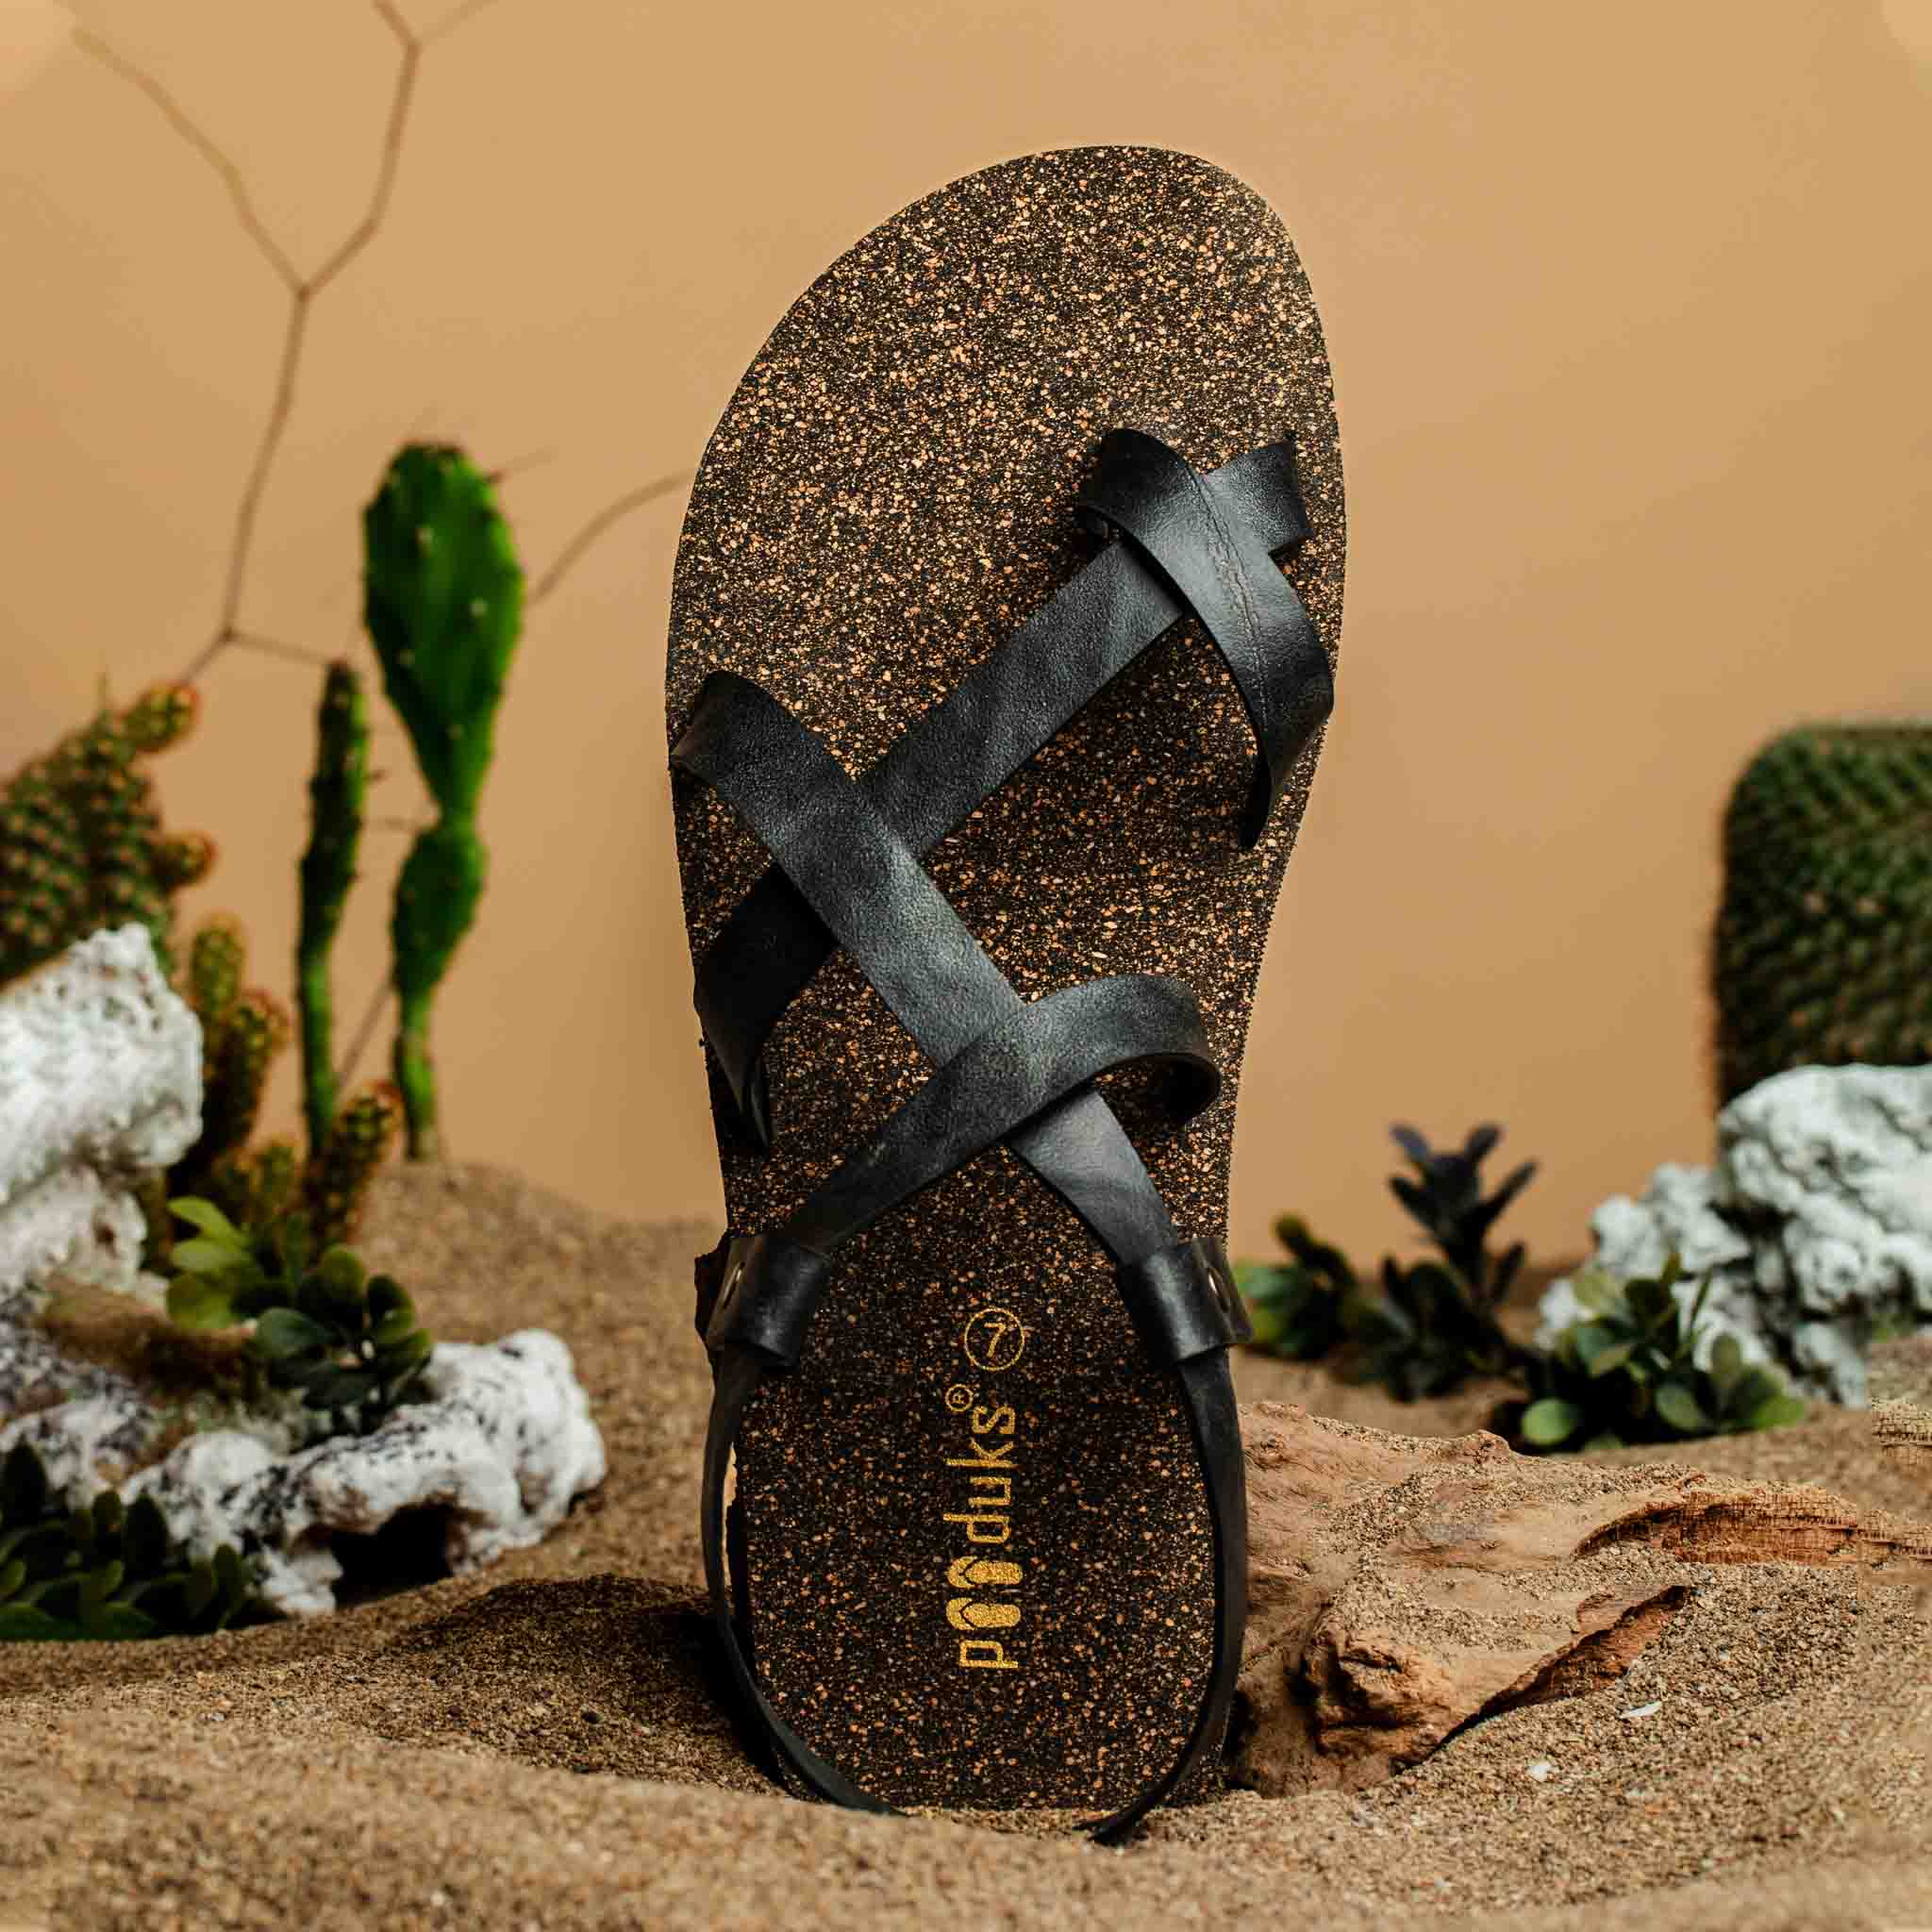 The Comfortable Cork Sandals I Can't Stop Wearing - Take It From Nicole